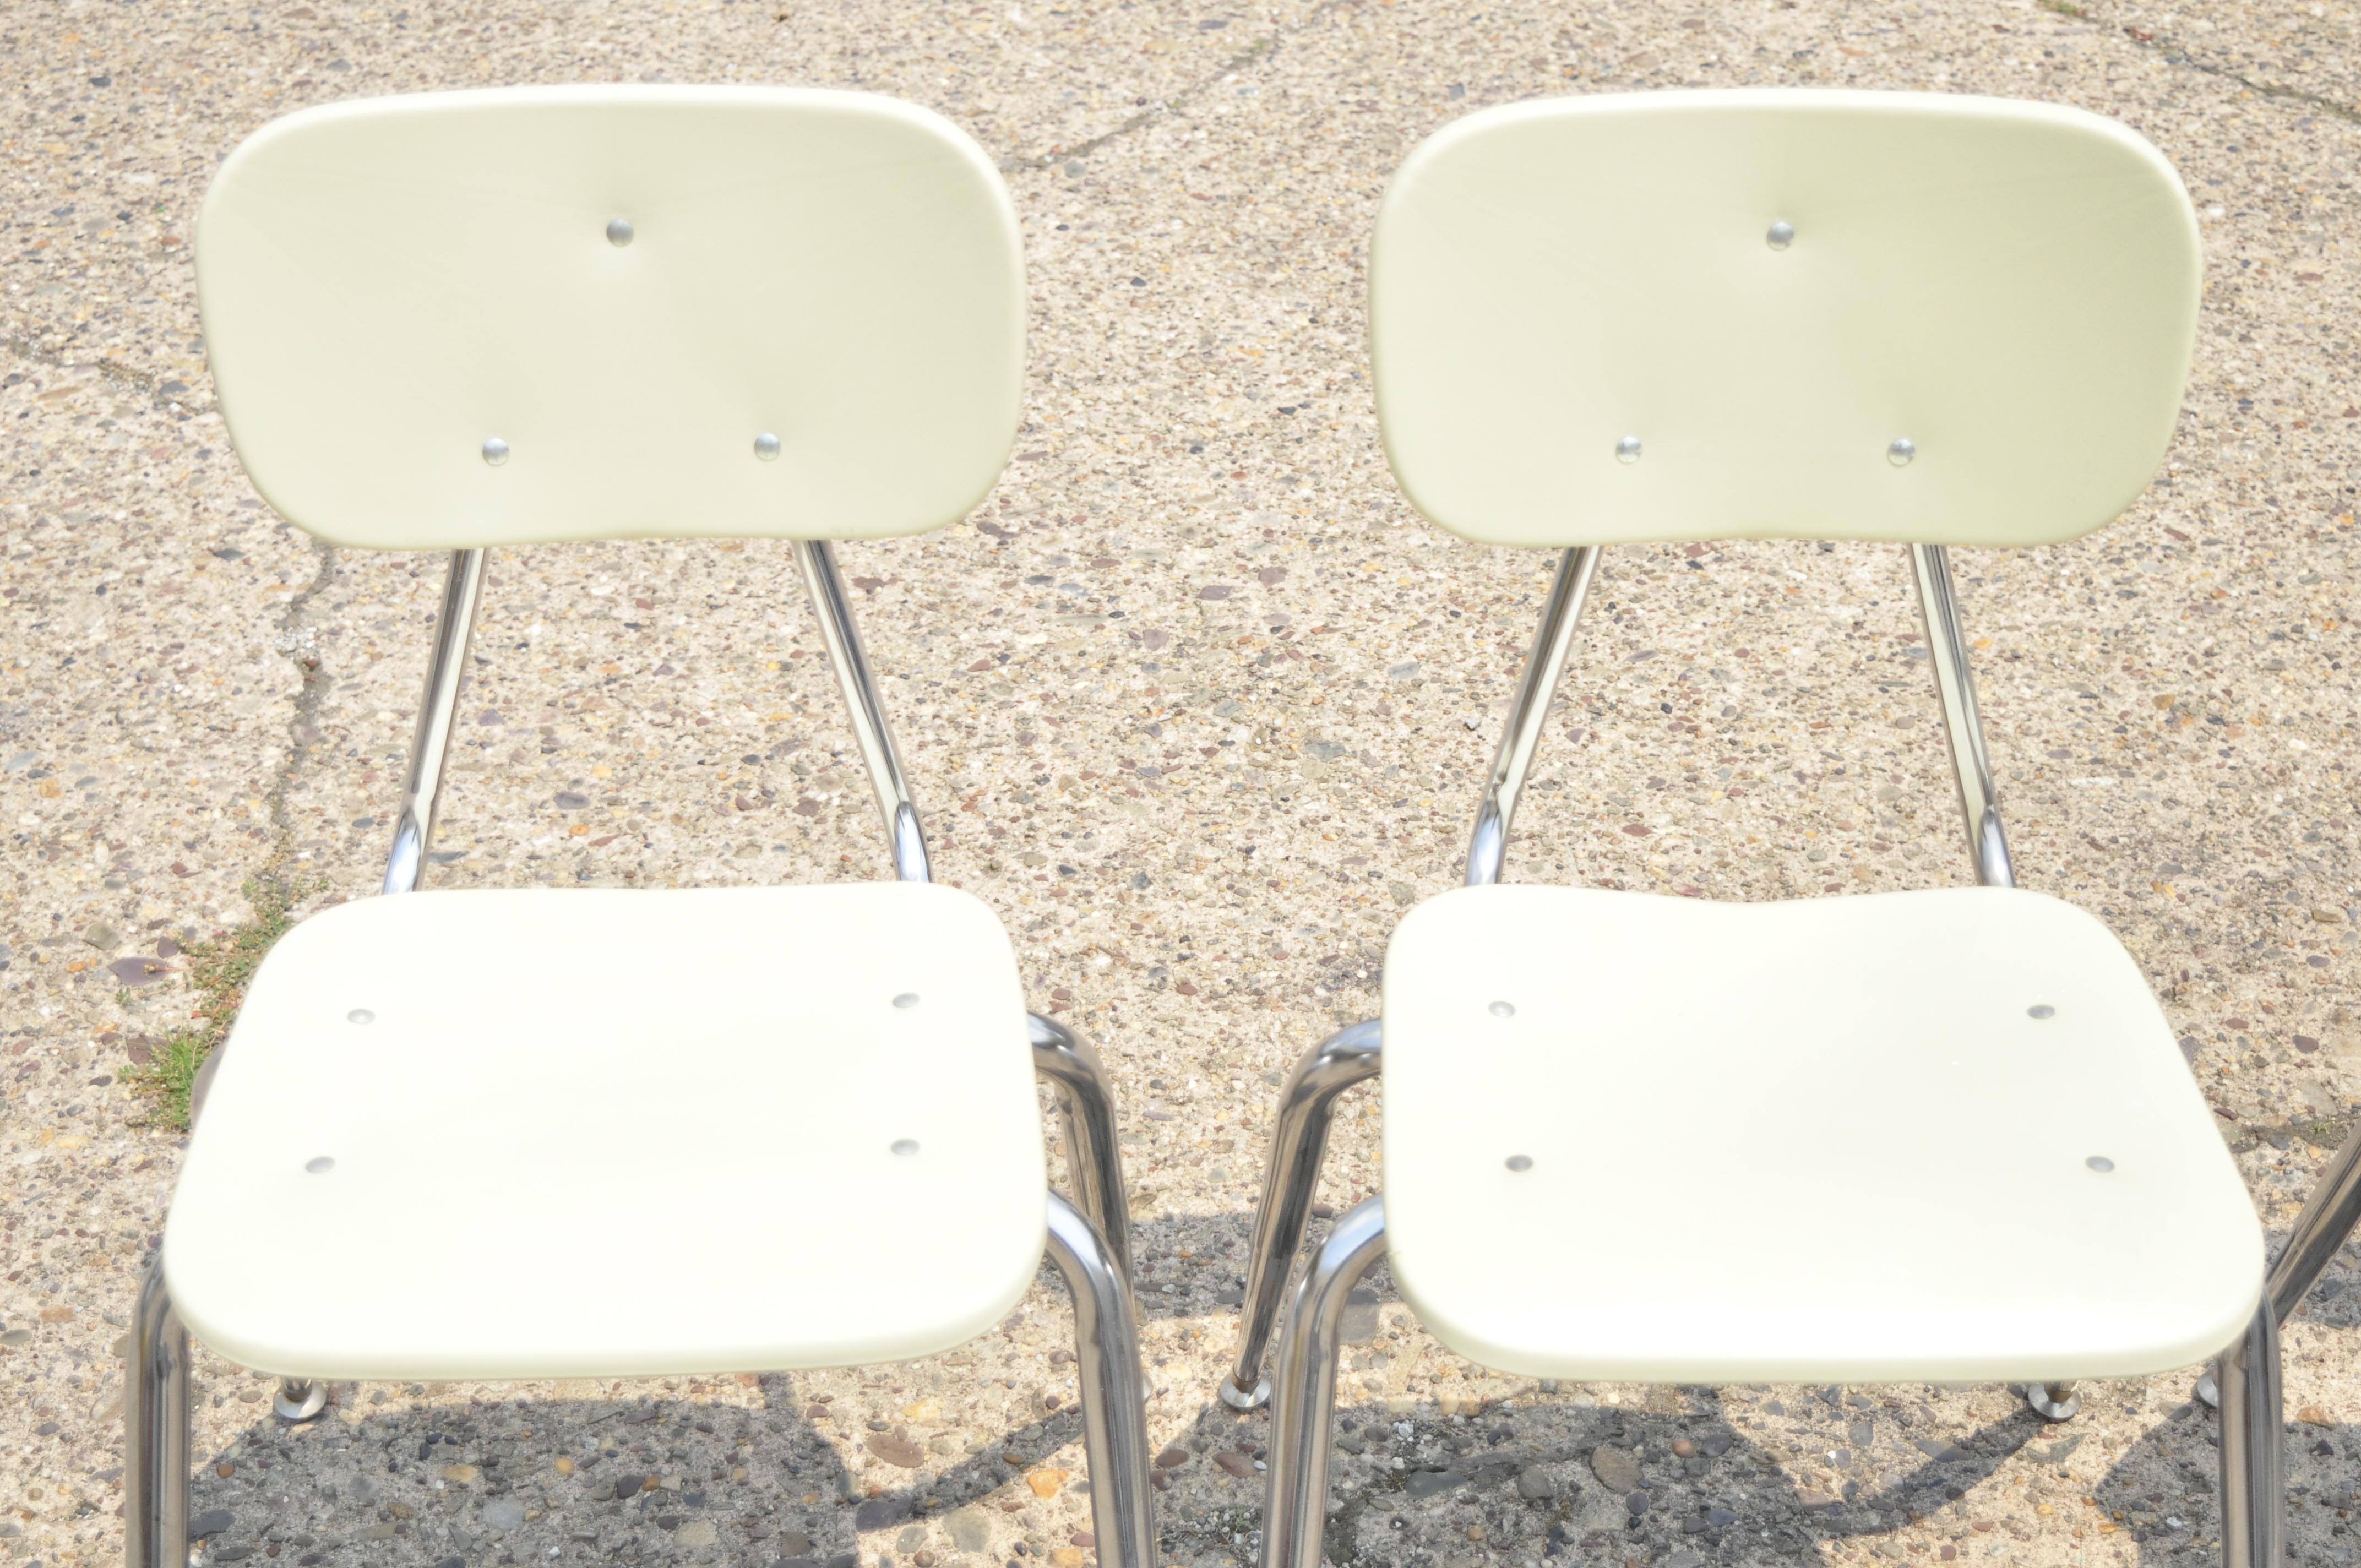 Vtg Beige Molded Plastic Chrome Metal Base Stacking School Side Chairs, Set of 4 For Sale 1